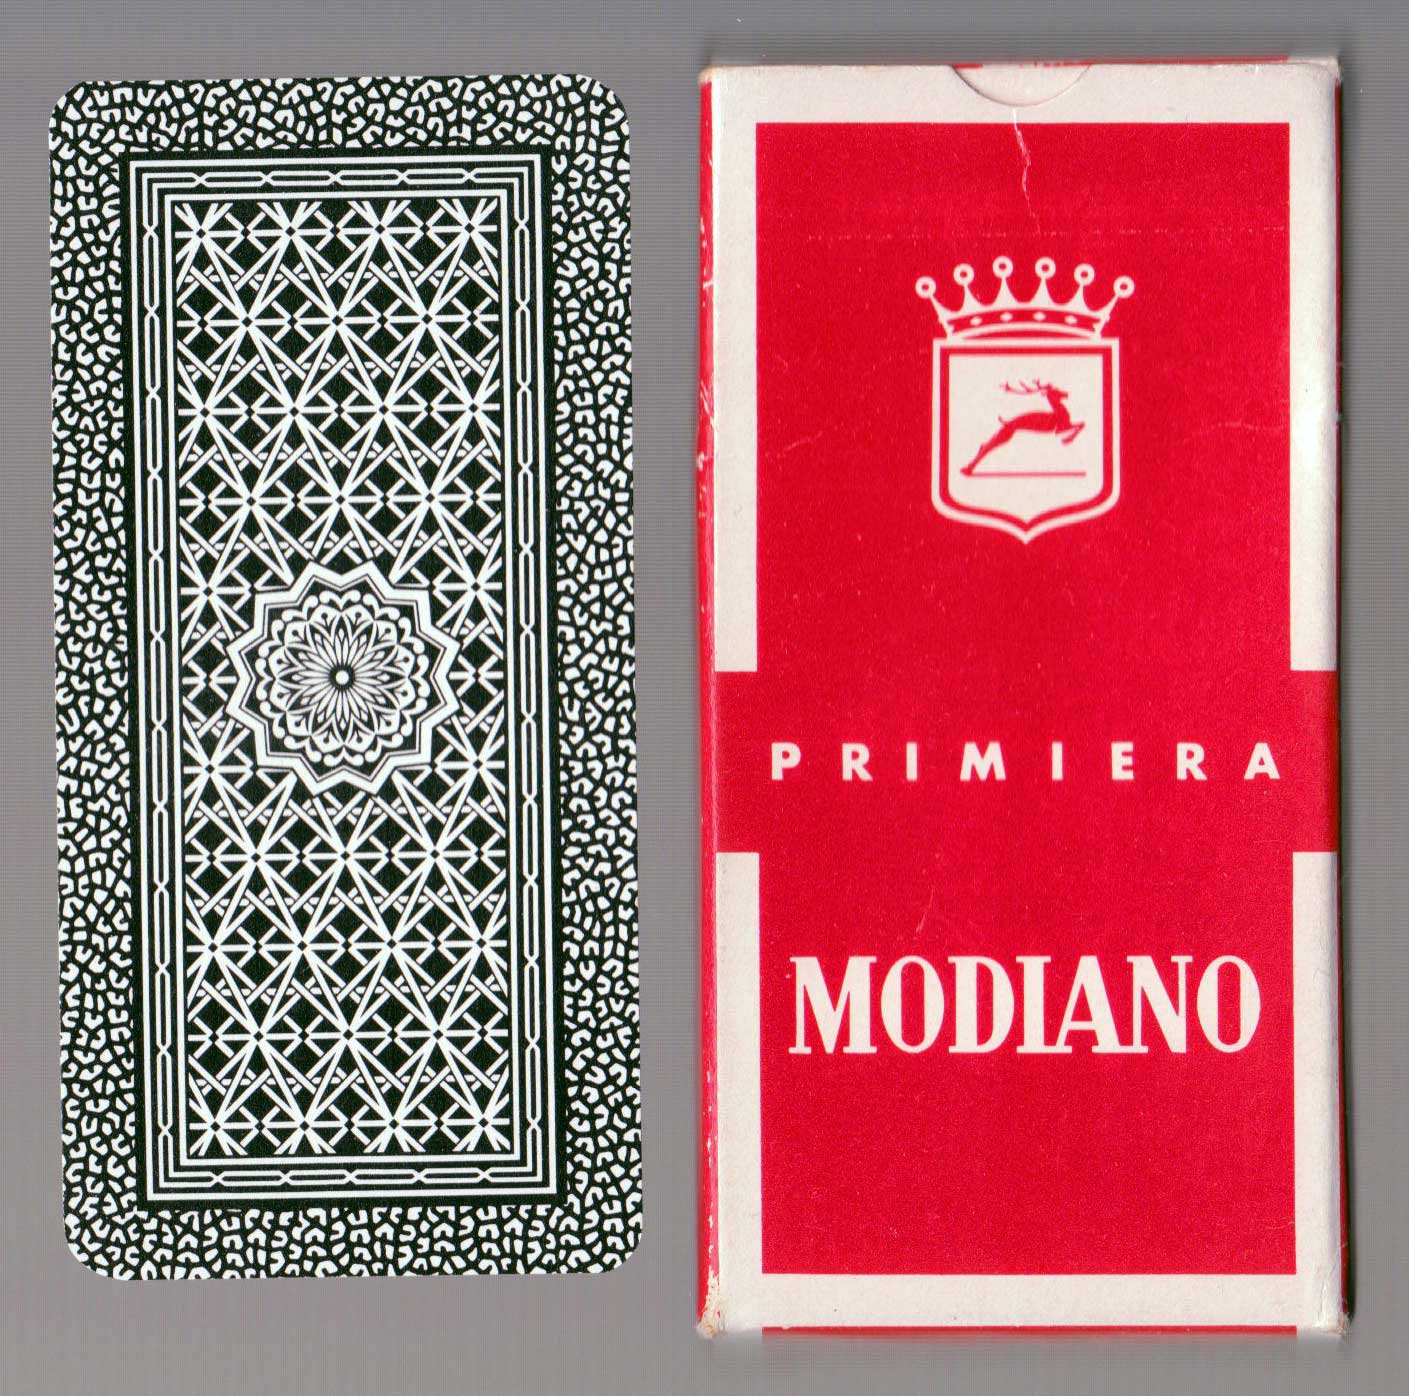 NEW MODIANO Primiera Bolognese Prime 16th century Italian Playing Cards SCOPA 